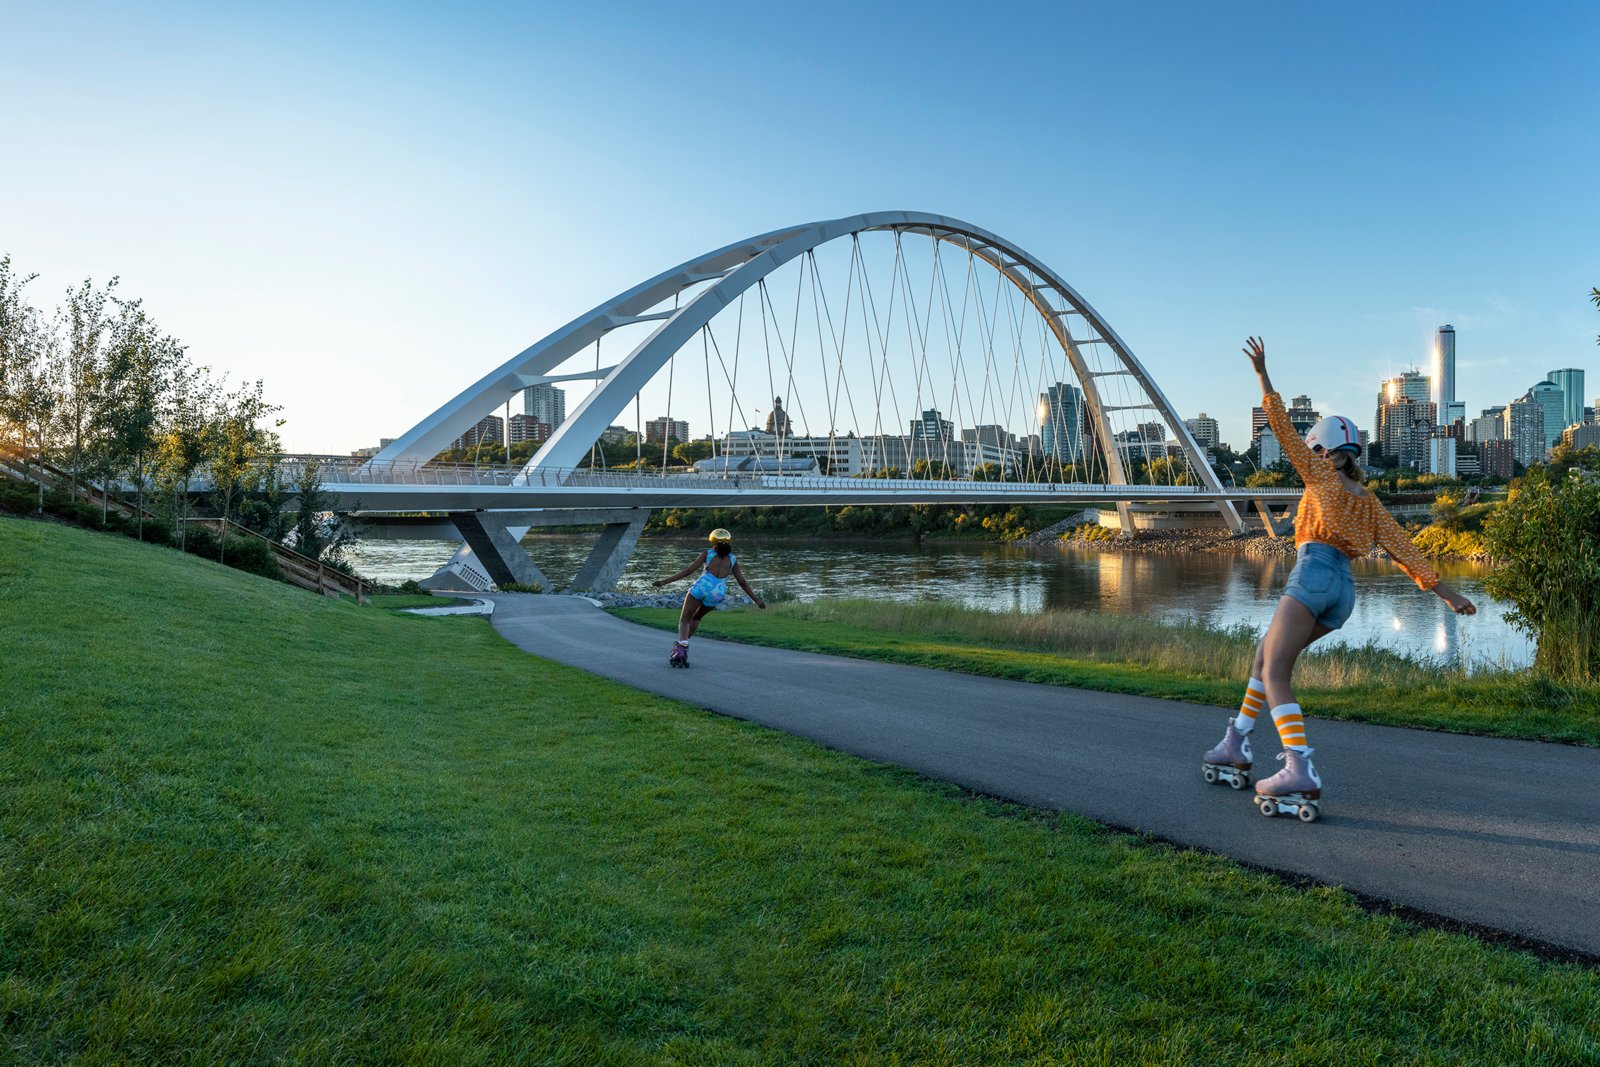 Two young women in summer clothes roller skate on pathway by North Saskatchewan River in Edmonton, heading towards Walterdale Bridge. City skyline shimmers in background, creating a fun atmosphere.